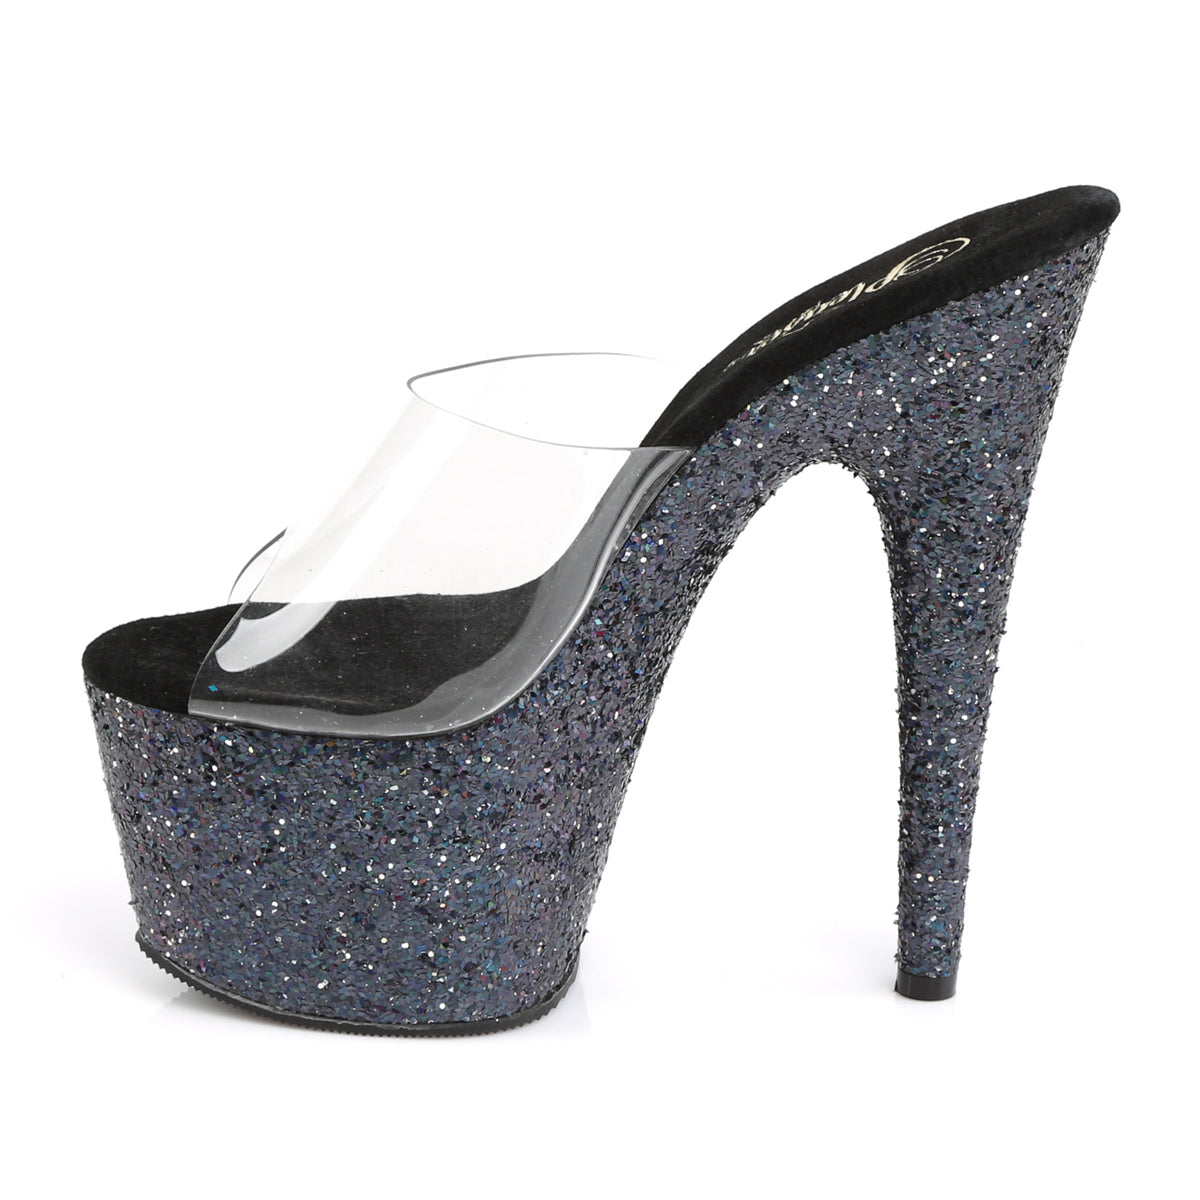 ADORE-701LG 7" Clear and Black Glitter Platforms Sexy Shoes-Pleaser- Sexy Shoes Pole Dance Heels